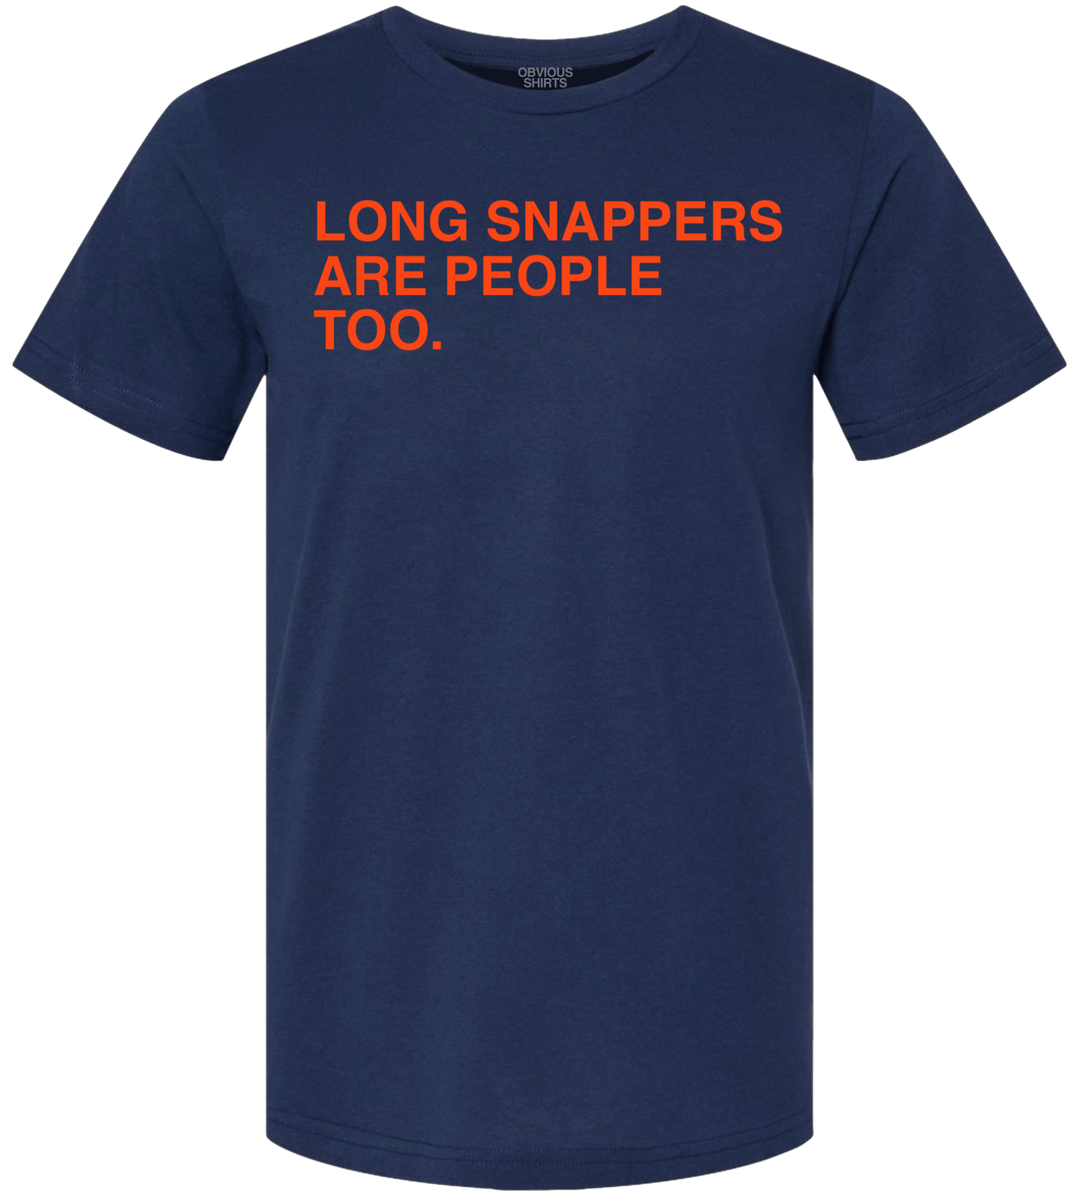 LONG SNAPPERS ARE PEOPLE TOO. (NAVY/ORANGE) - OBVIOUS SHIRTS